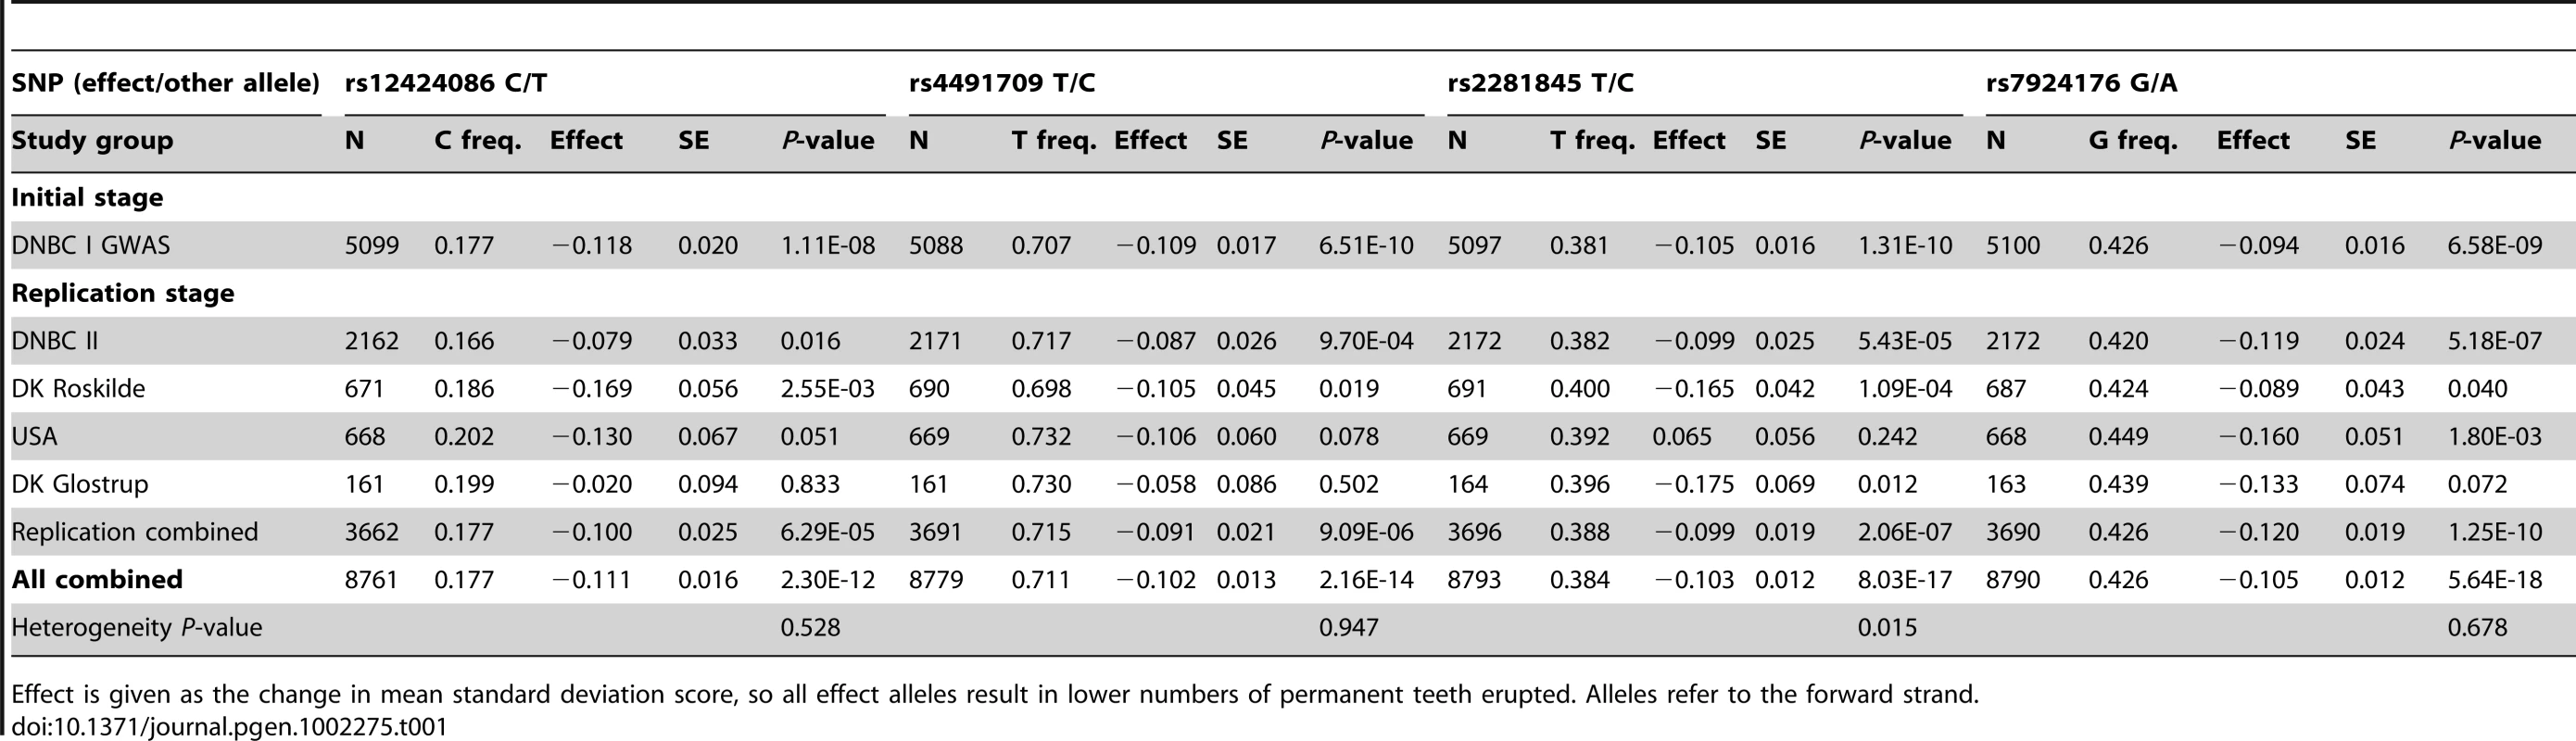 Initial, replication, and combined results for number of permanent teeth erupted between age 6 and 14 years, analyzed as age-adjusted standard deviation scores averaged over multiple time points.